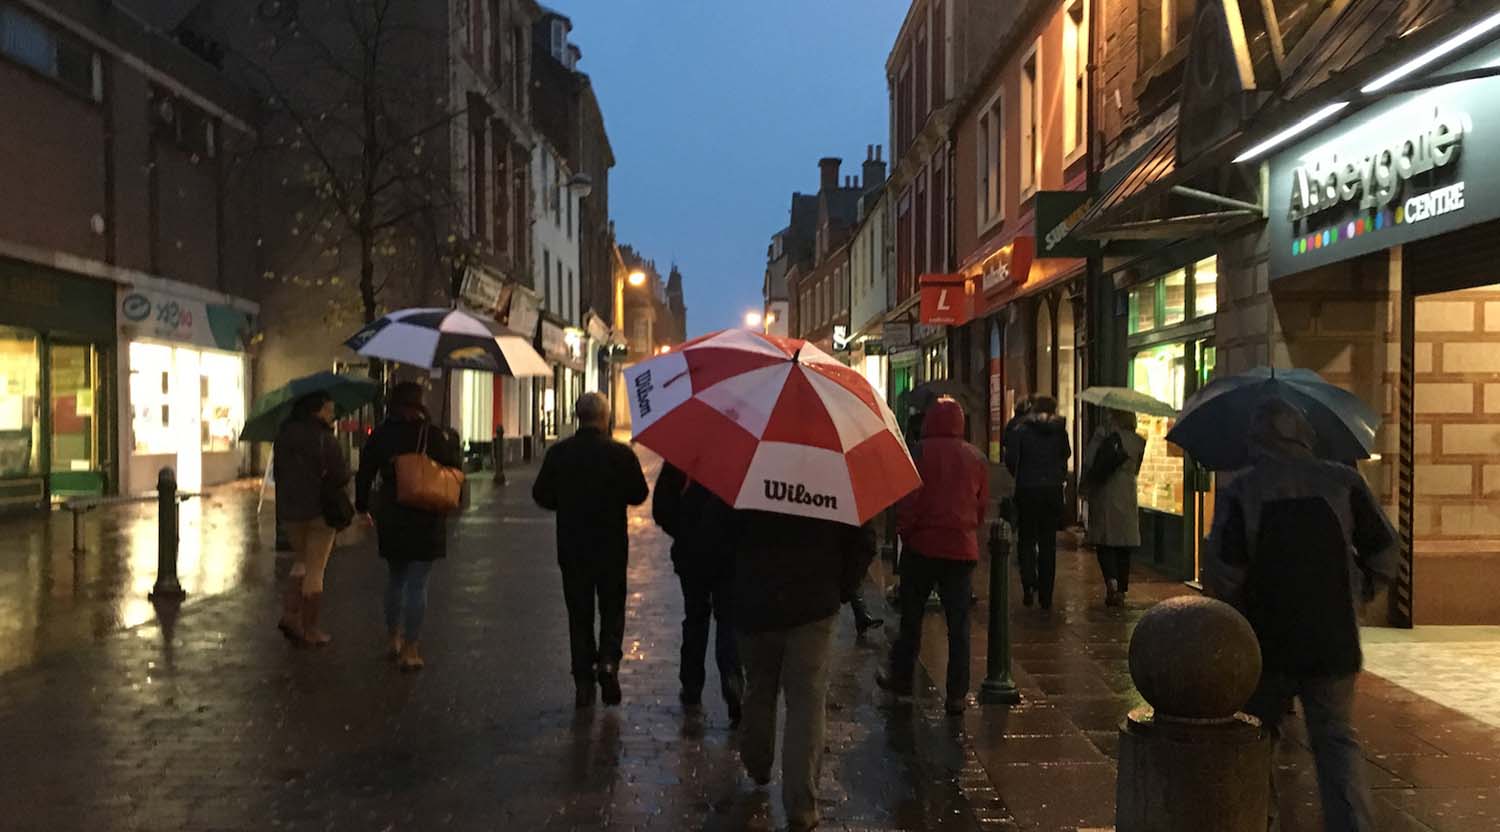 A group of people walking away from the camera at dusk through a high street